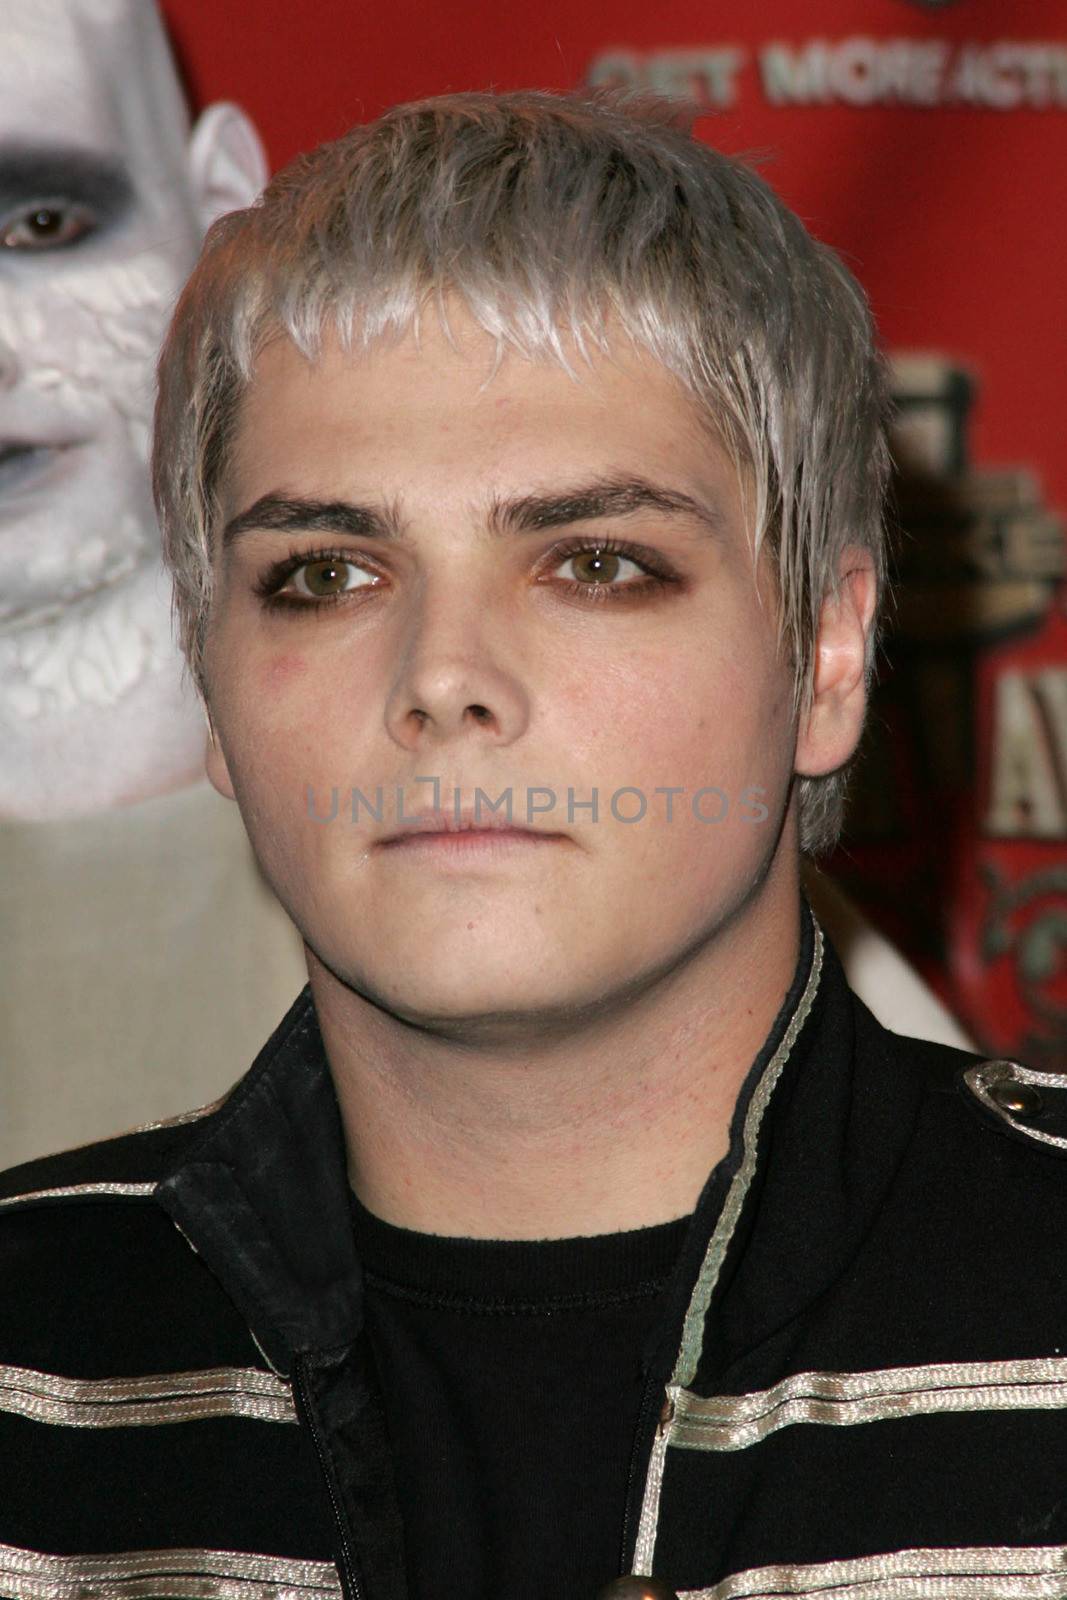 Gerard Way of My Chemical Romance
in the press room at Spike TV's "Scream Awards 2006". Pantages Theatre, Hollywood, CA. 10-07-06